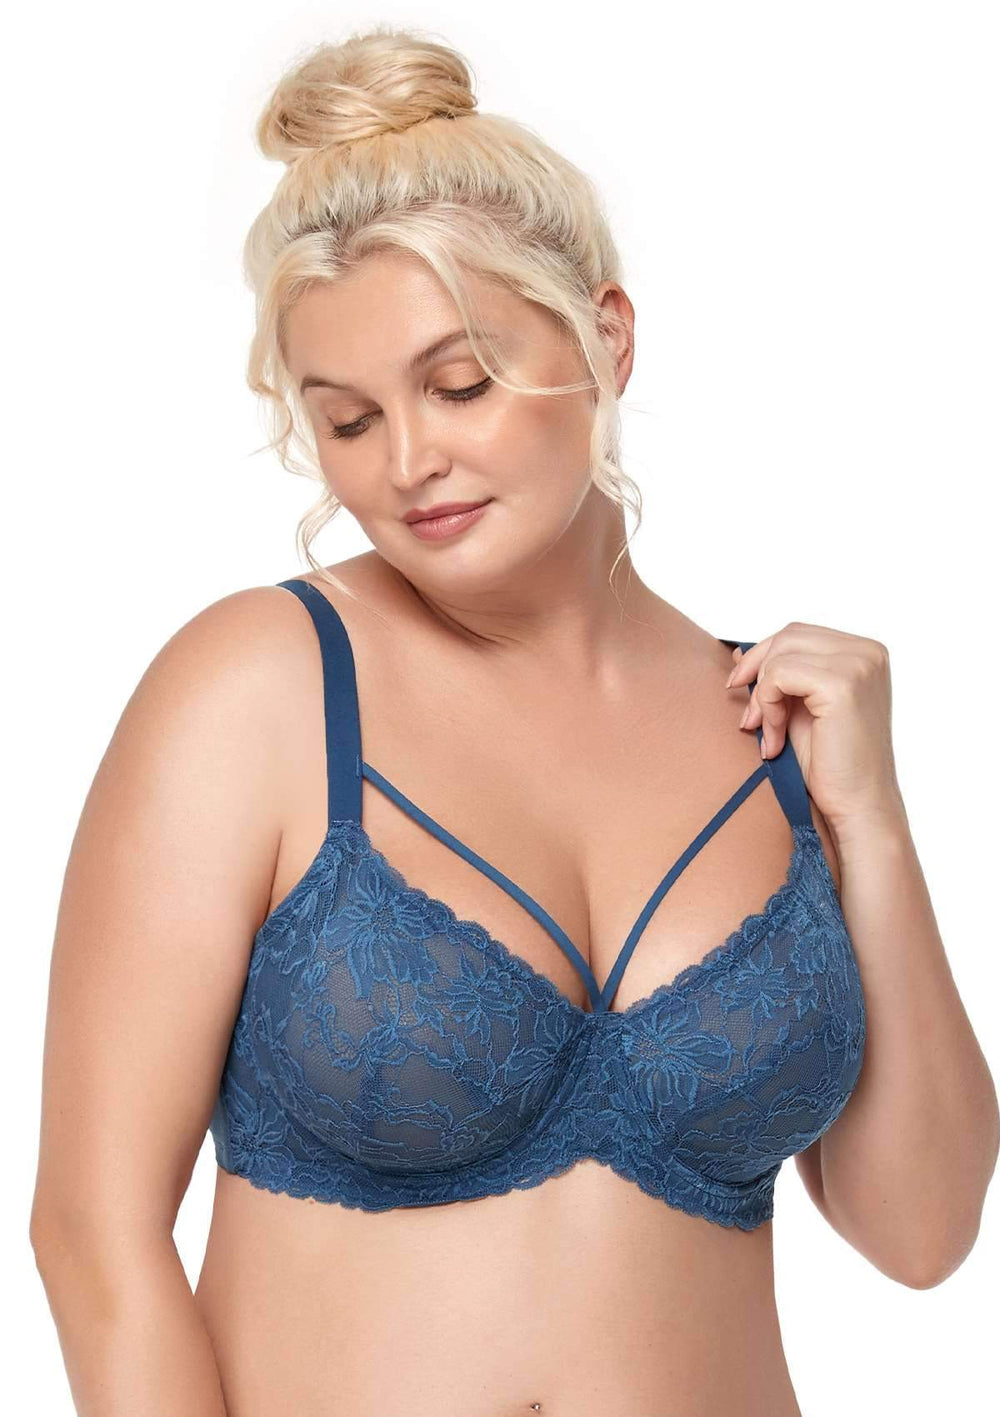 What Are The Best Bras for Big Boobs?, by Hsia Lingerie